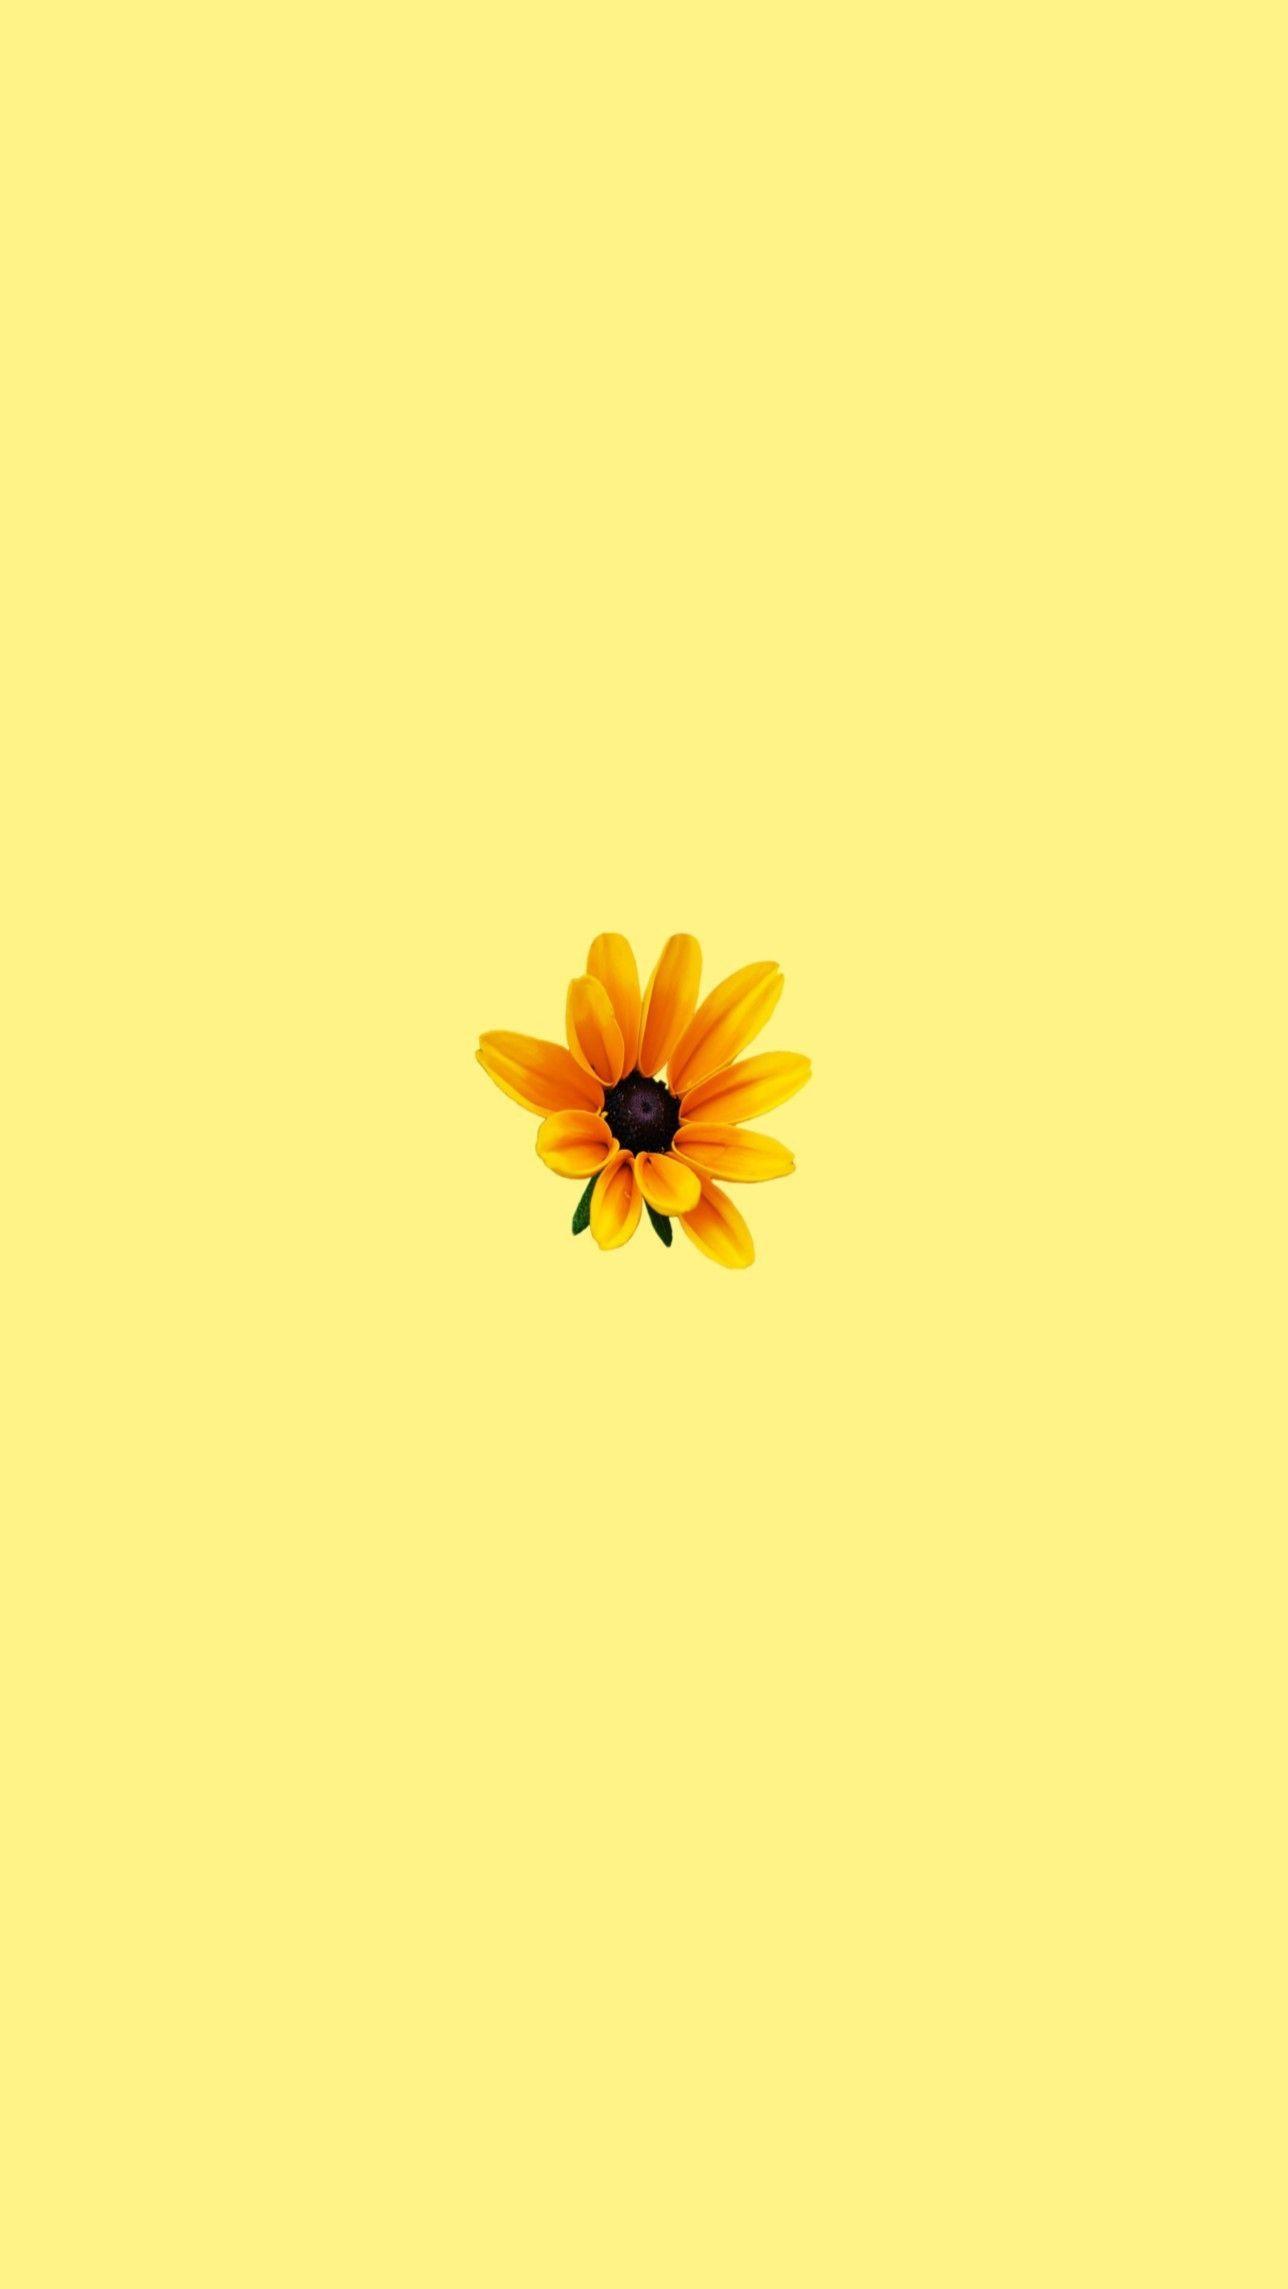 Aesthetic Pastel Yellow Wallpapers Wallpaper Cave Sunflower aesthetic is hd wallpapers backgrounds for desktop or mobile device. aesthetic pastel yellow wallpapers